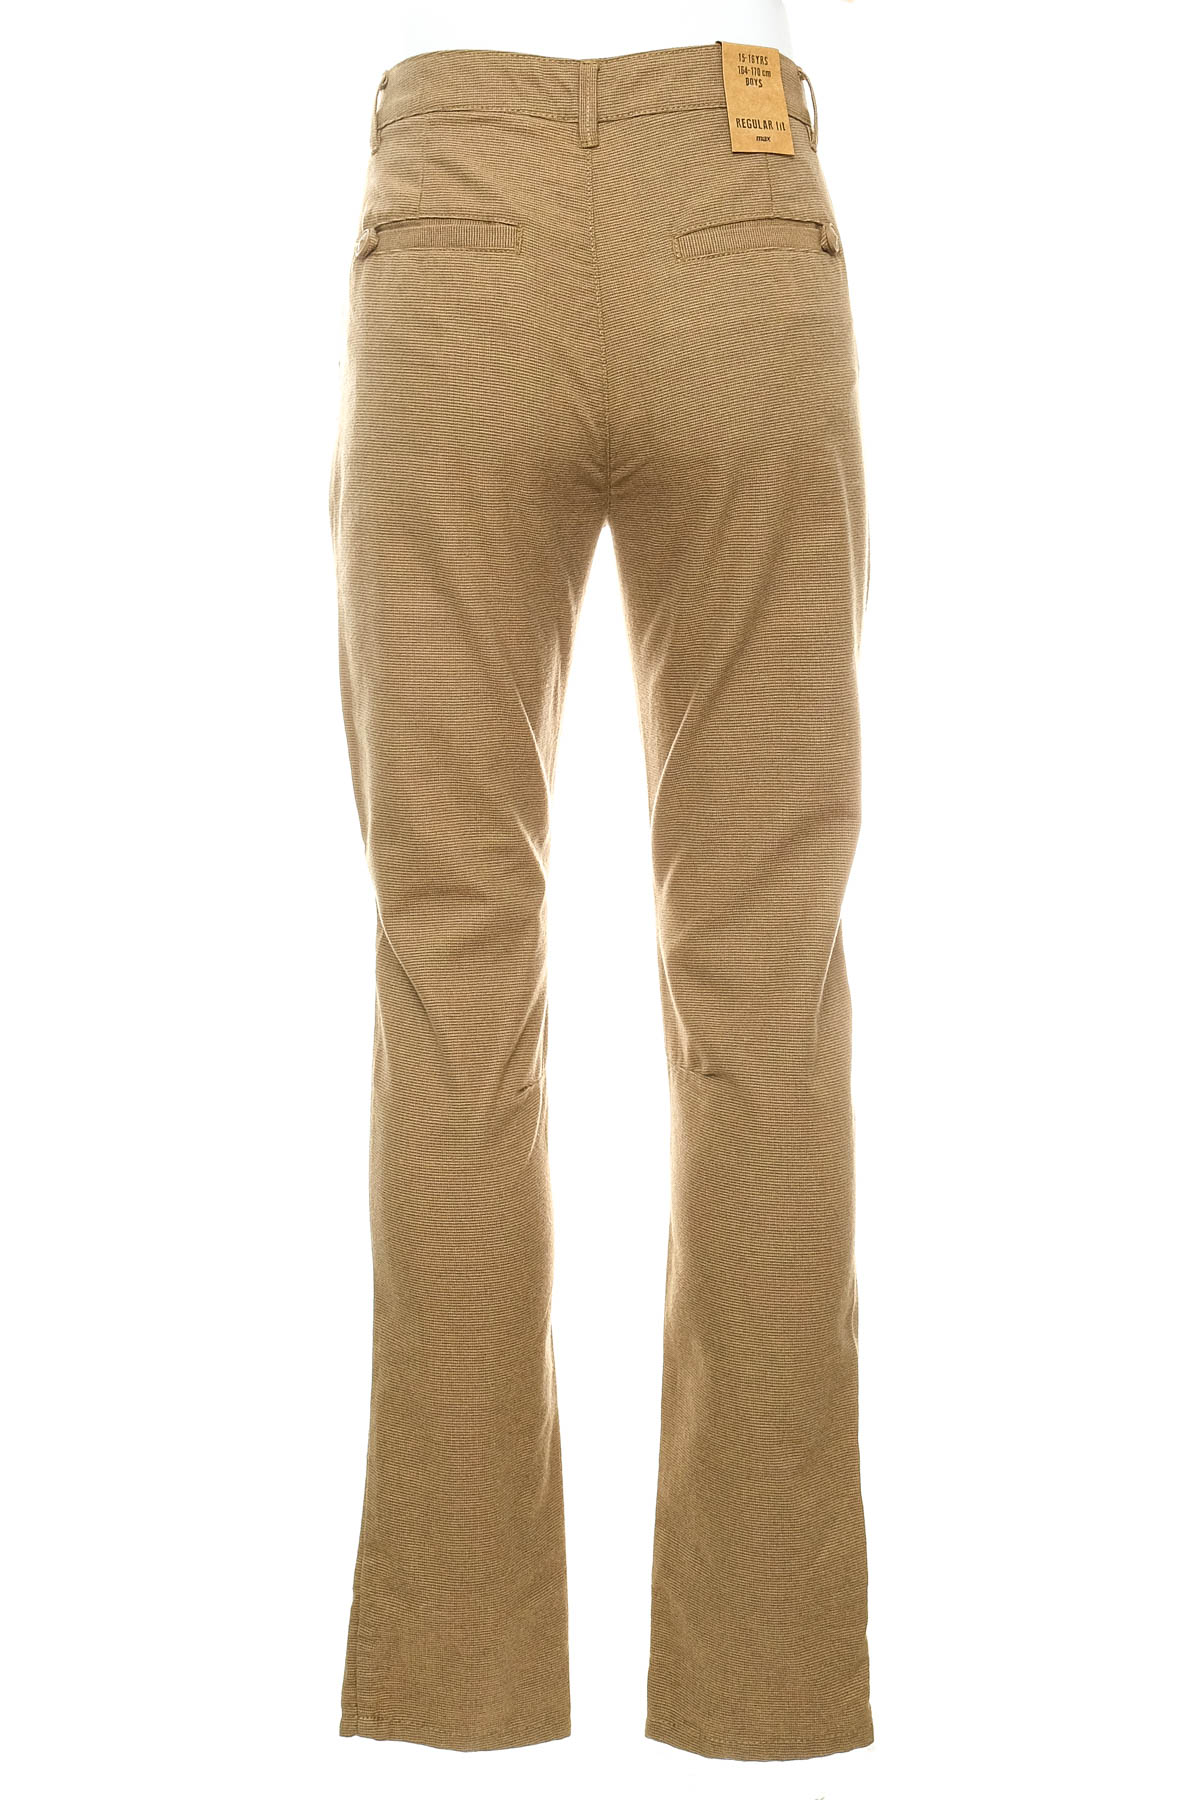 Trousers for boy - Max - 1